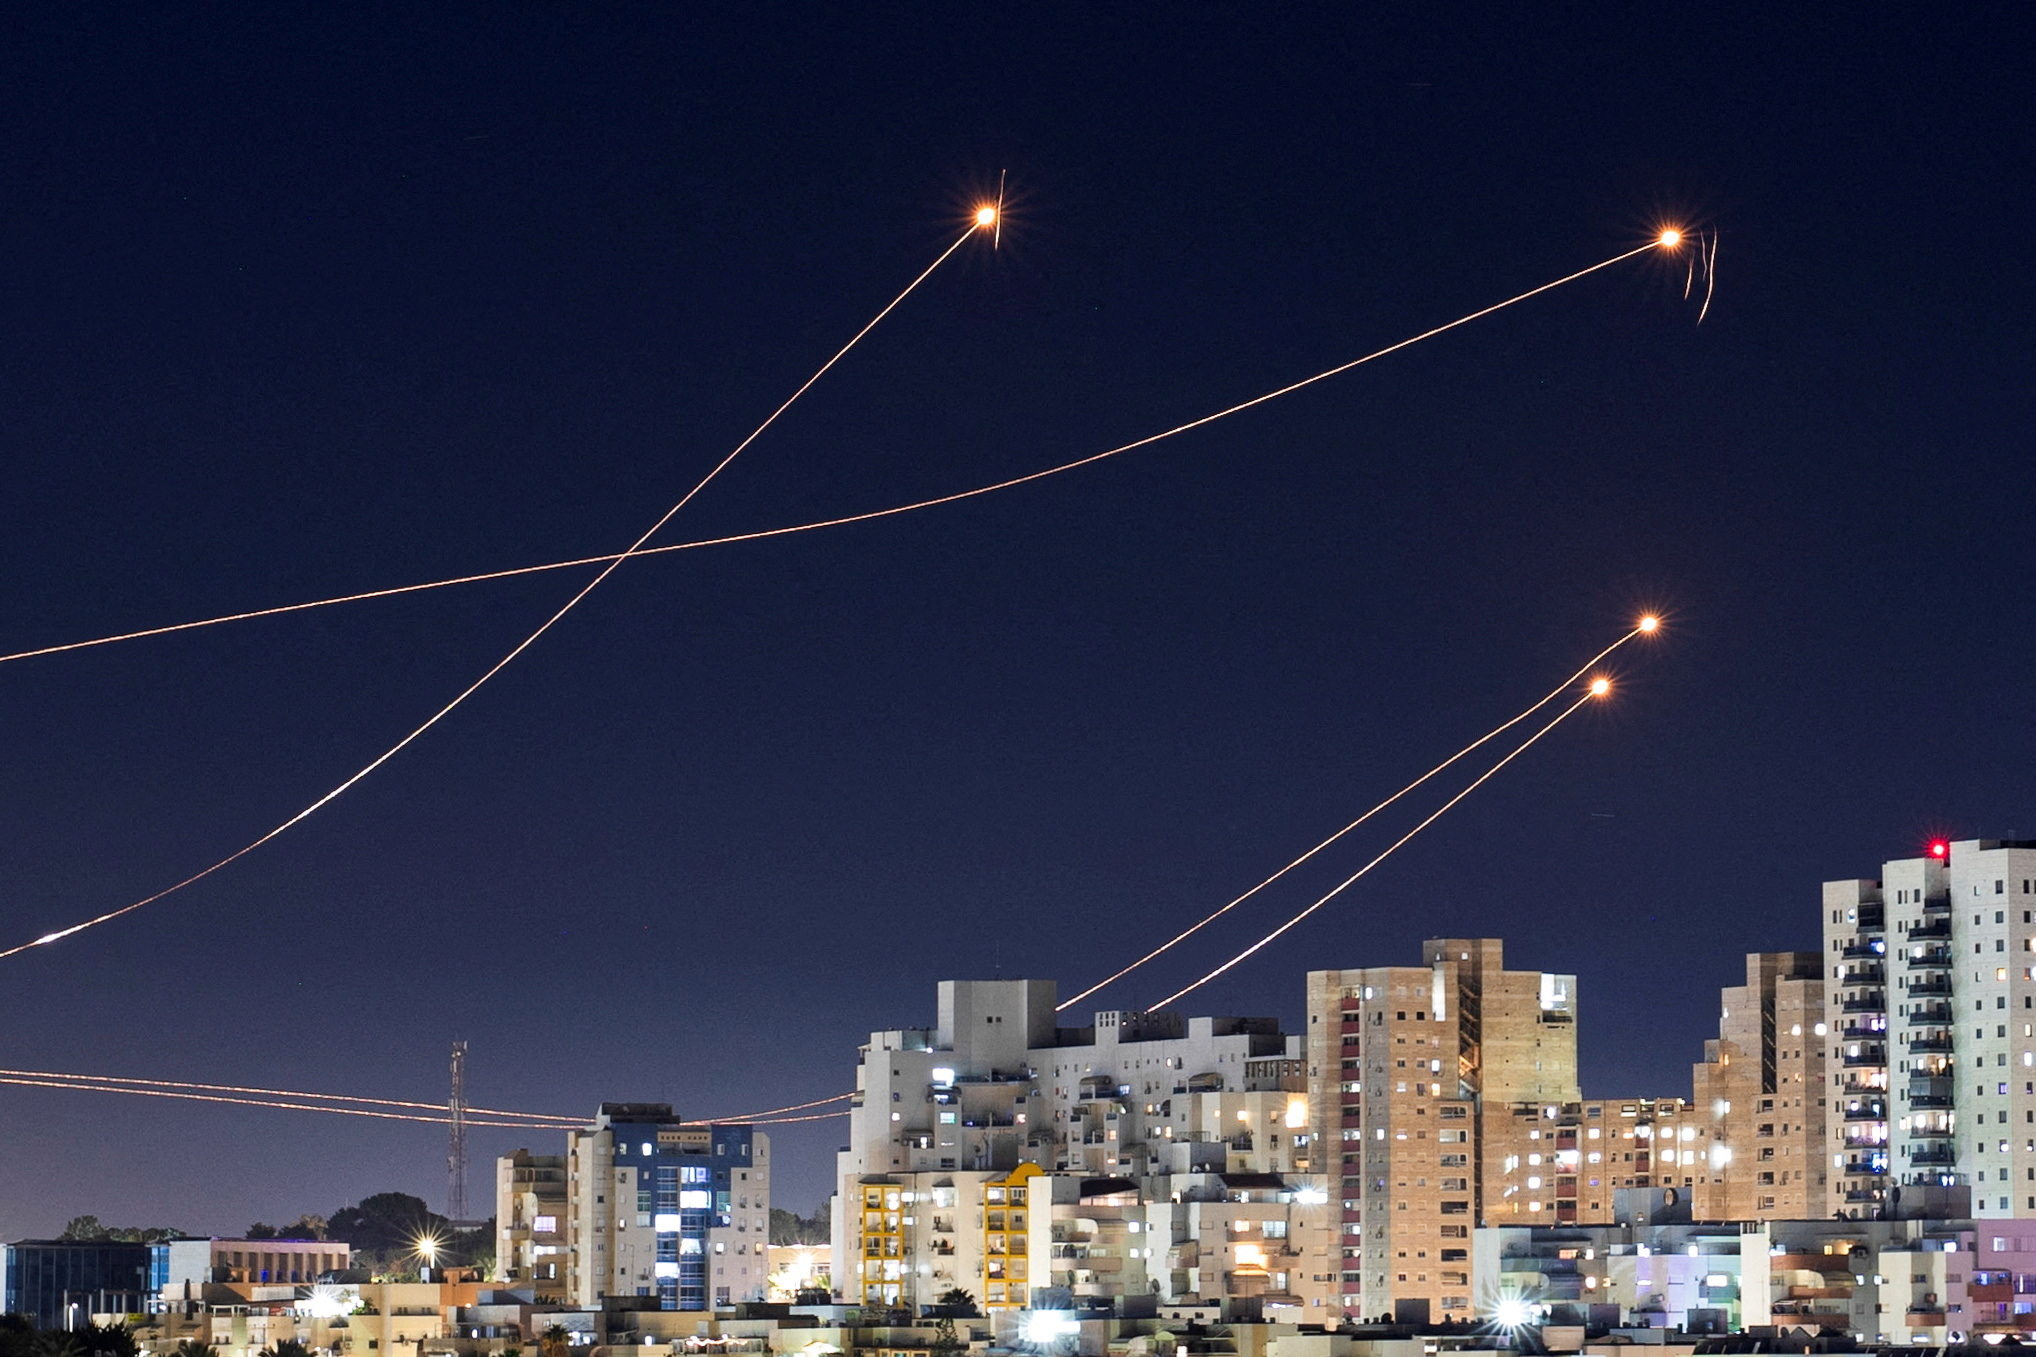 Israel's Iron Dome anti-missile system intercepts rockets launched from the Gaza Strip